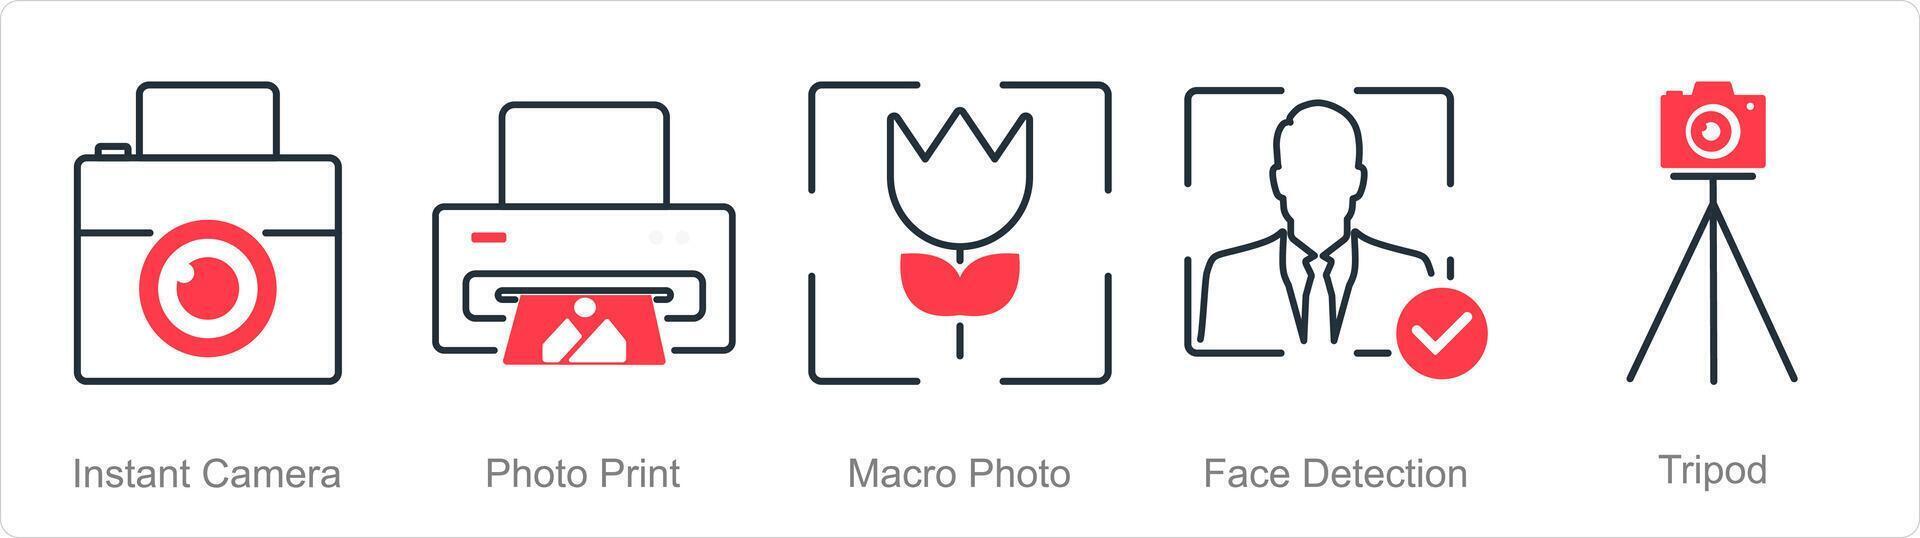 A set of 5 Photography icons as instant camera, photo print, macro photo vector